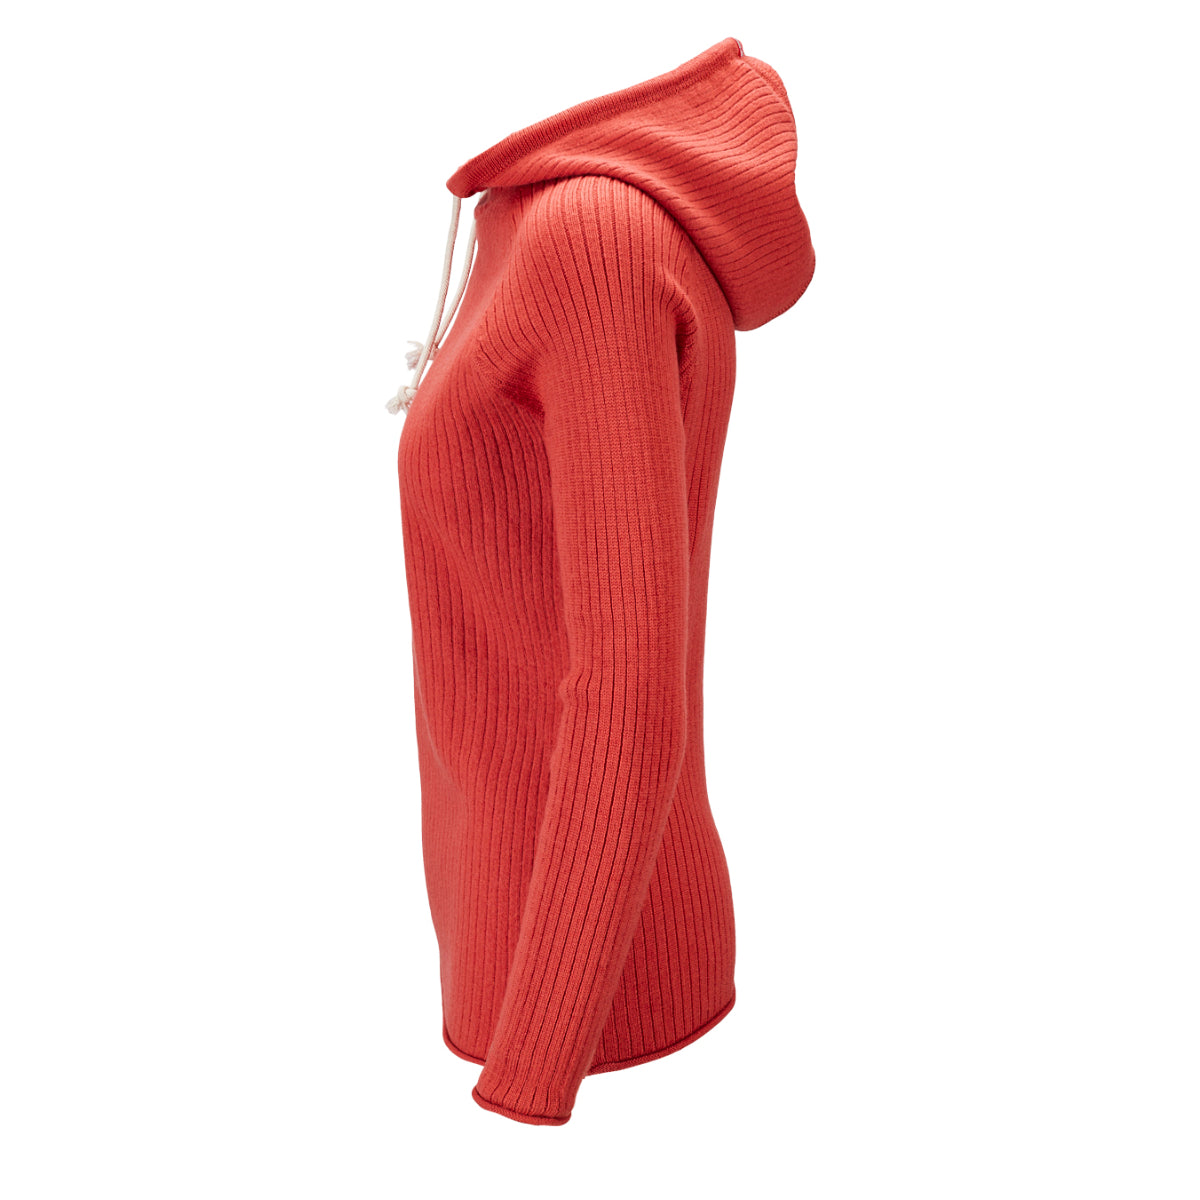 Amundsen Sports - Women's Boiled Hoodie - Weathered Red